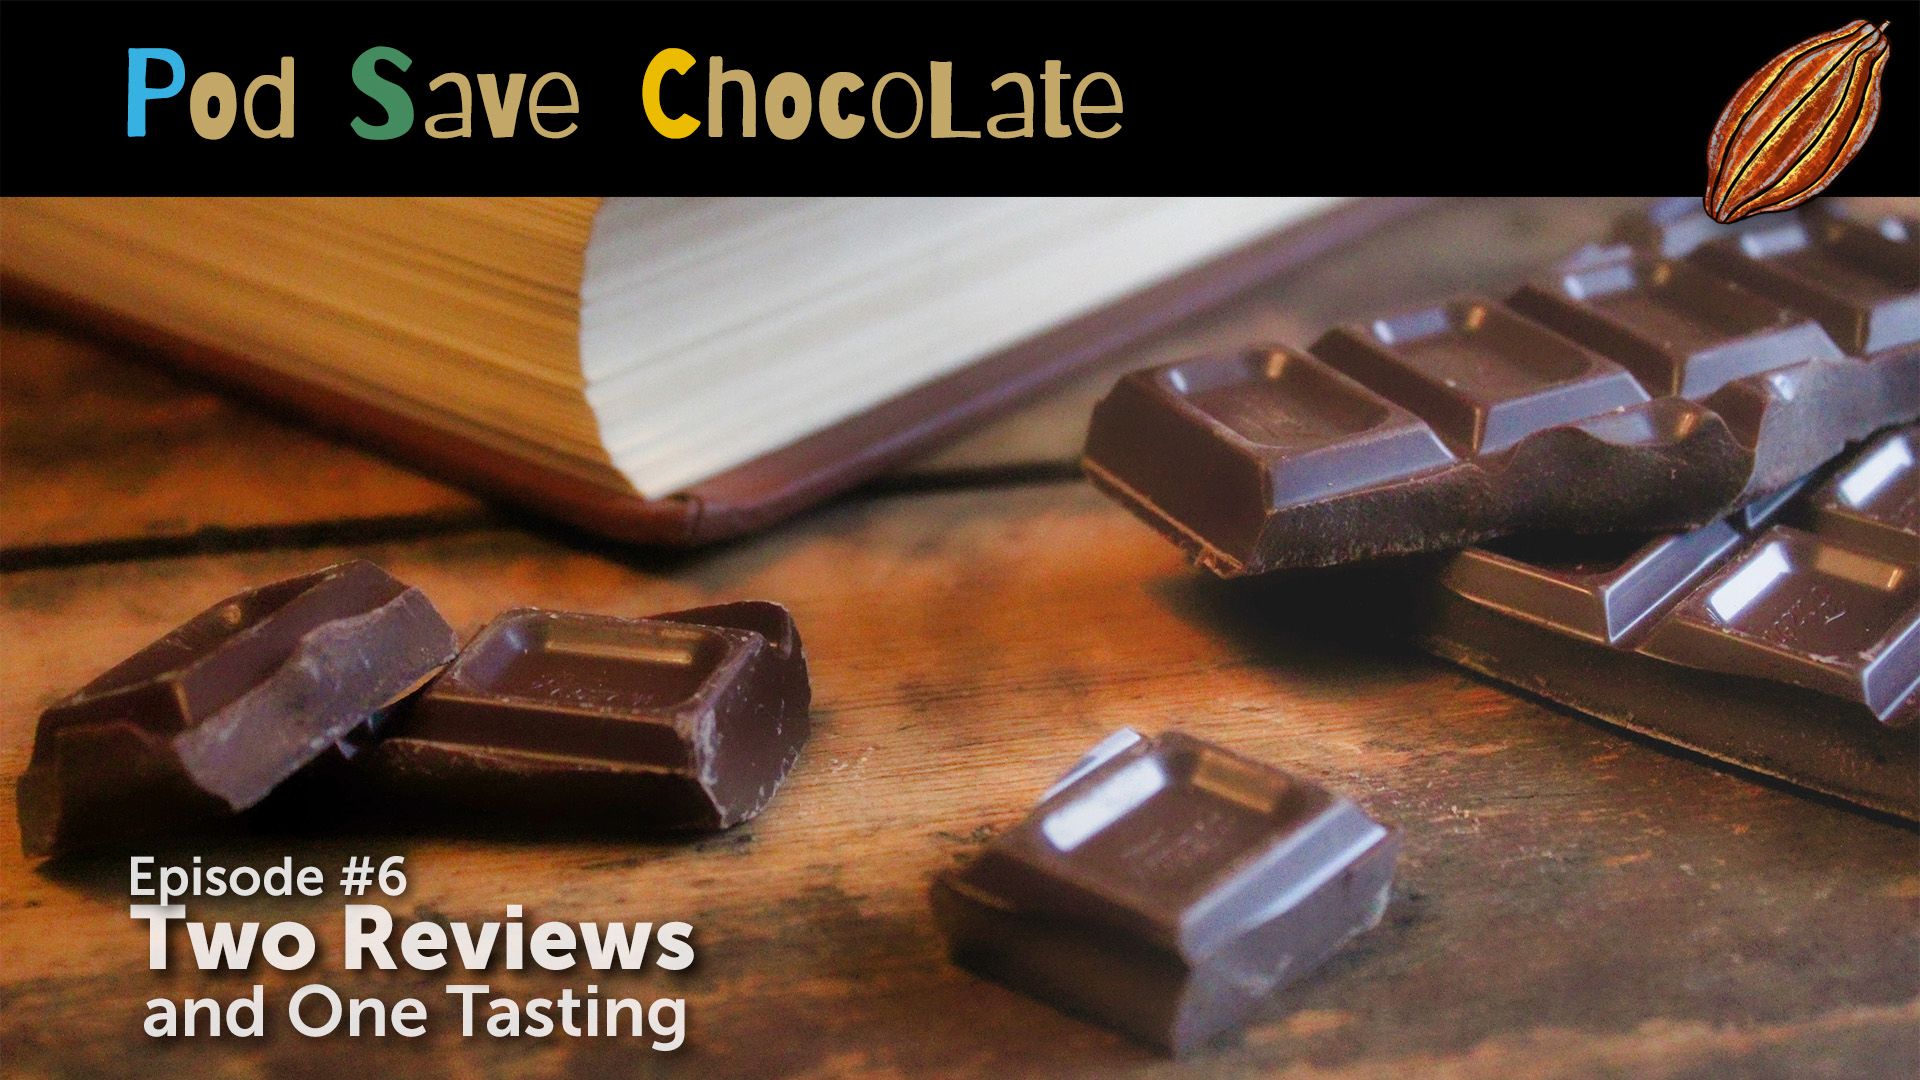 Two Reviews and One Tasting | #PodSaveChocolate